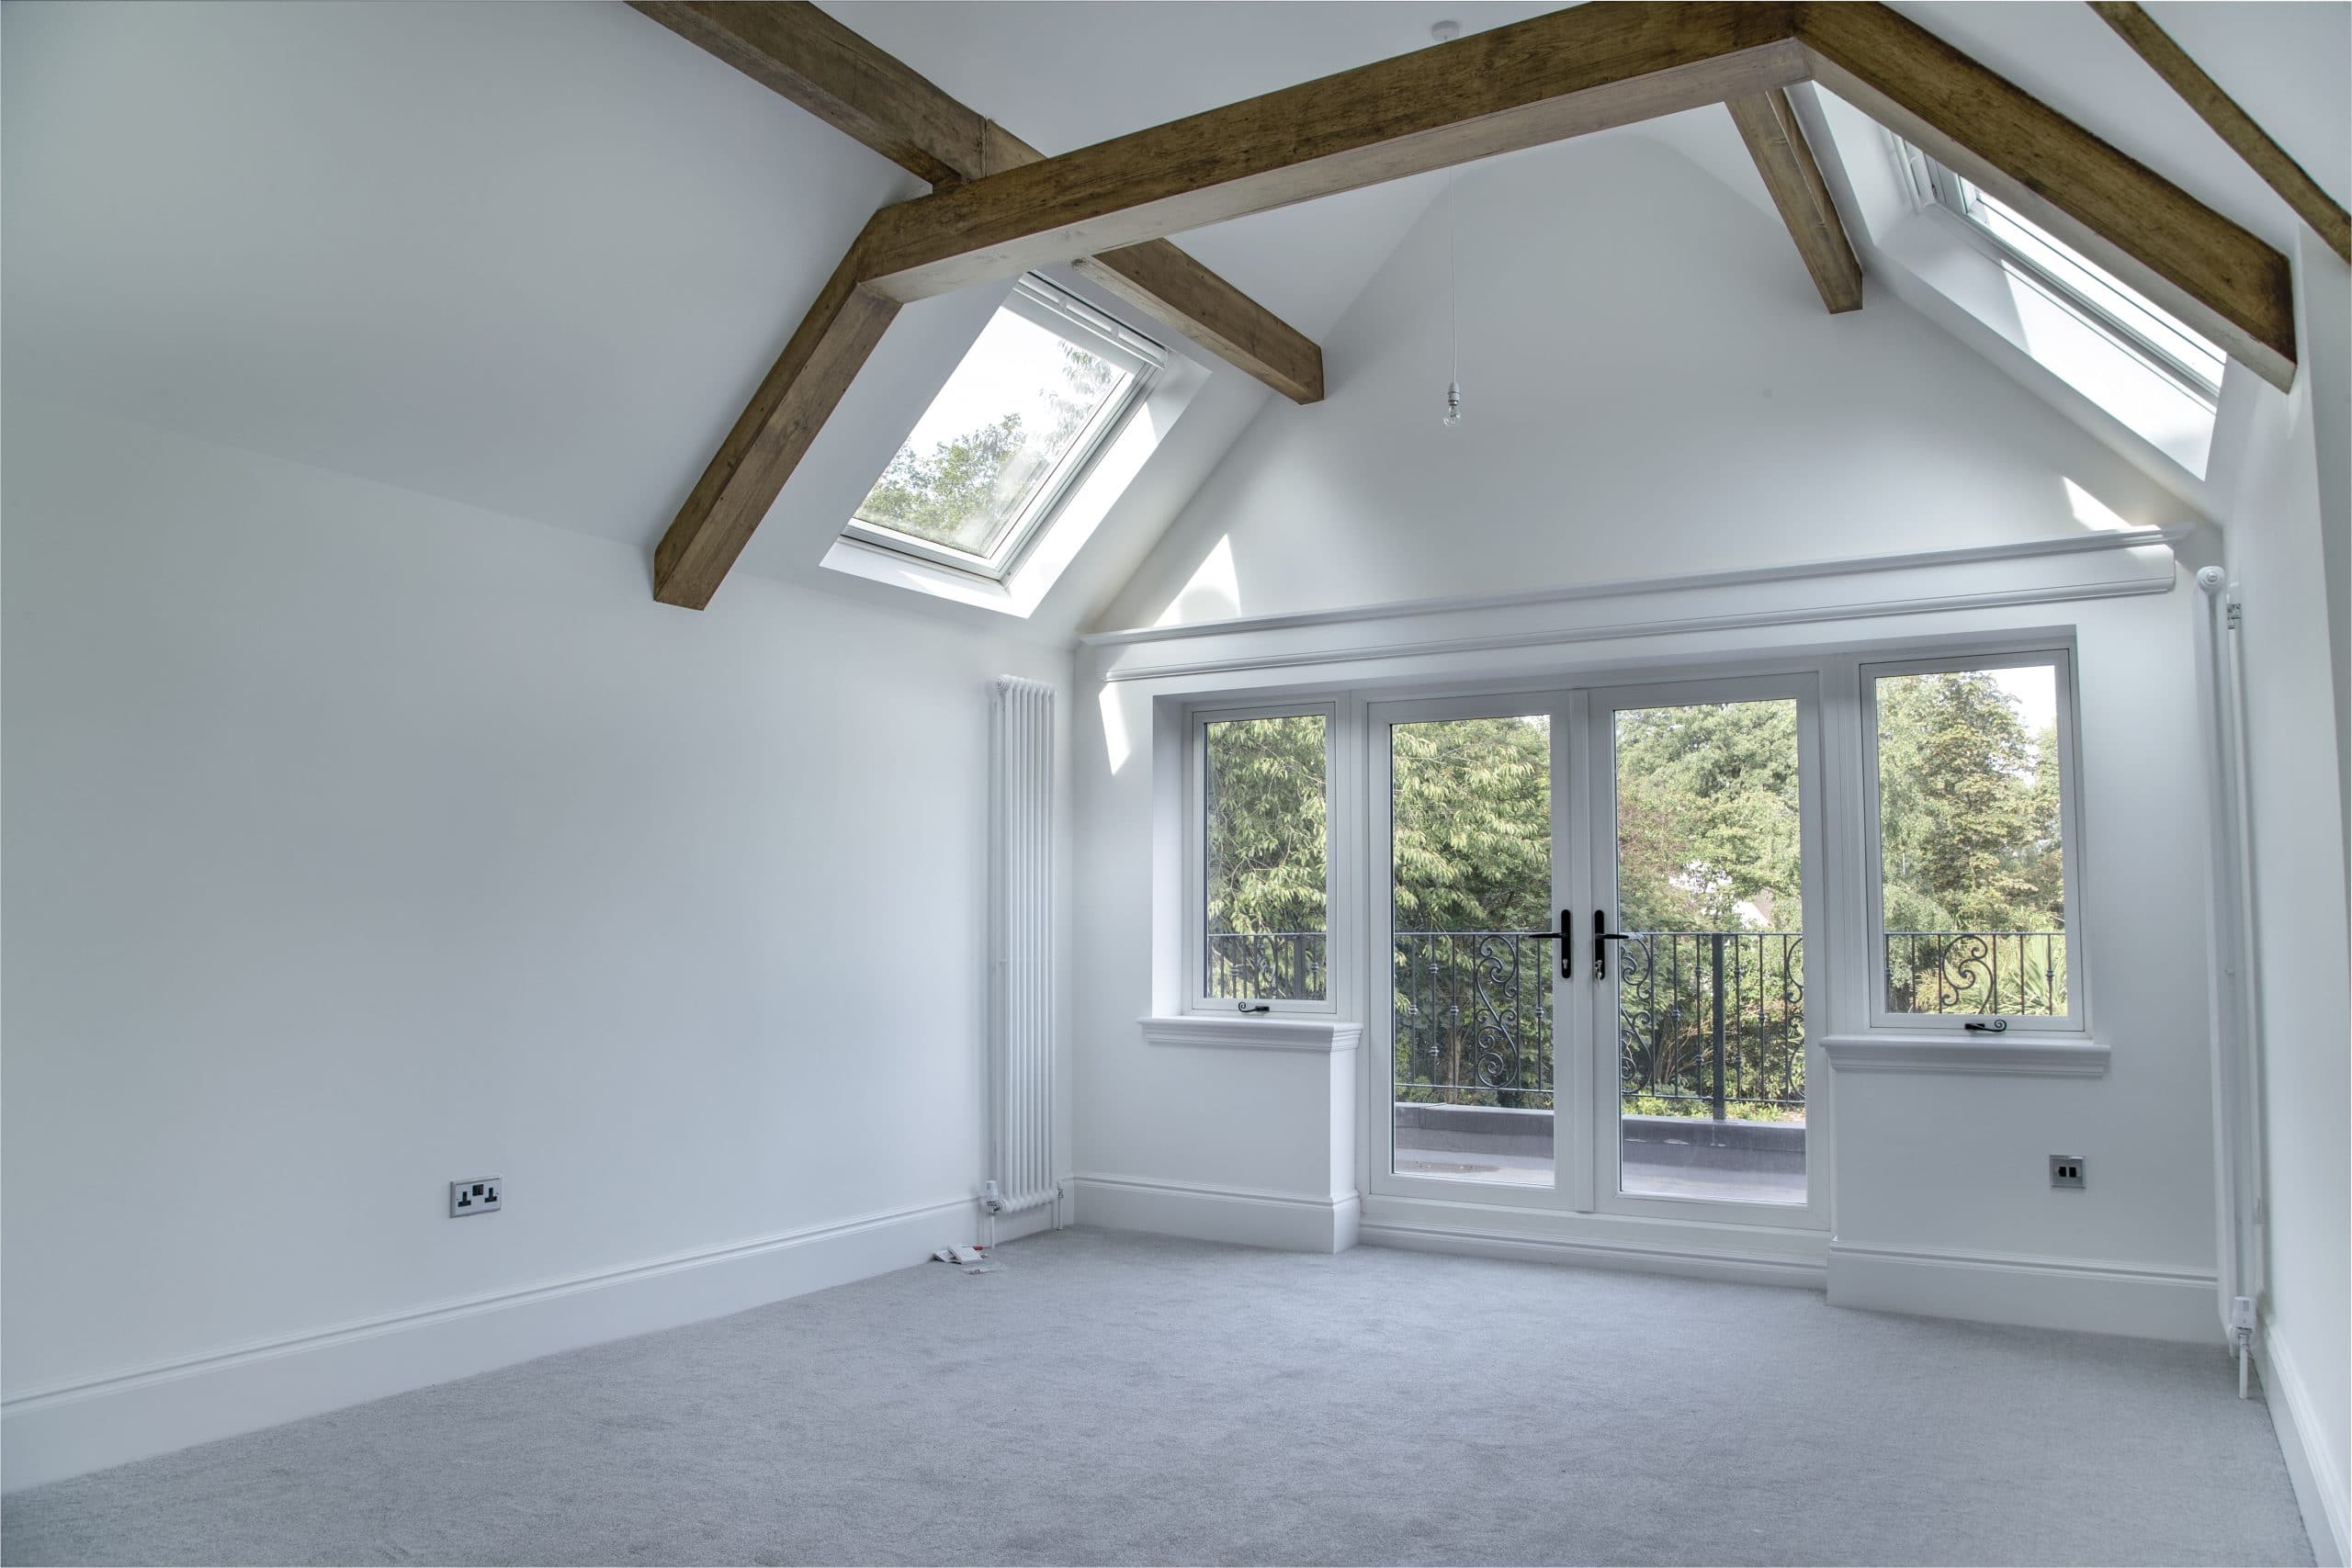 Empty room with wooden beams and a grey carpet